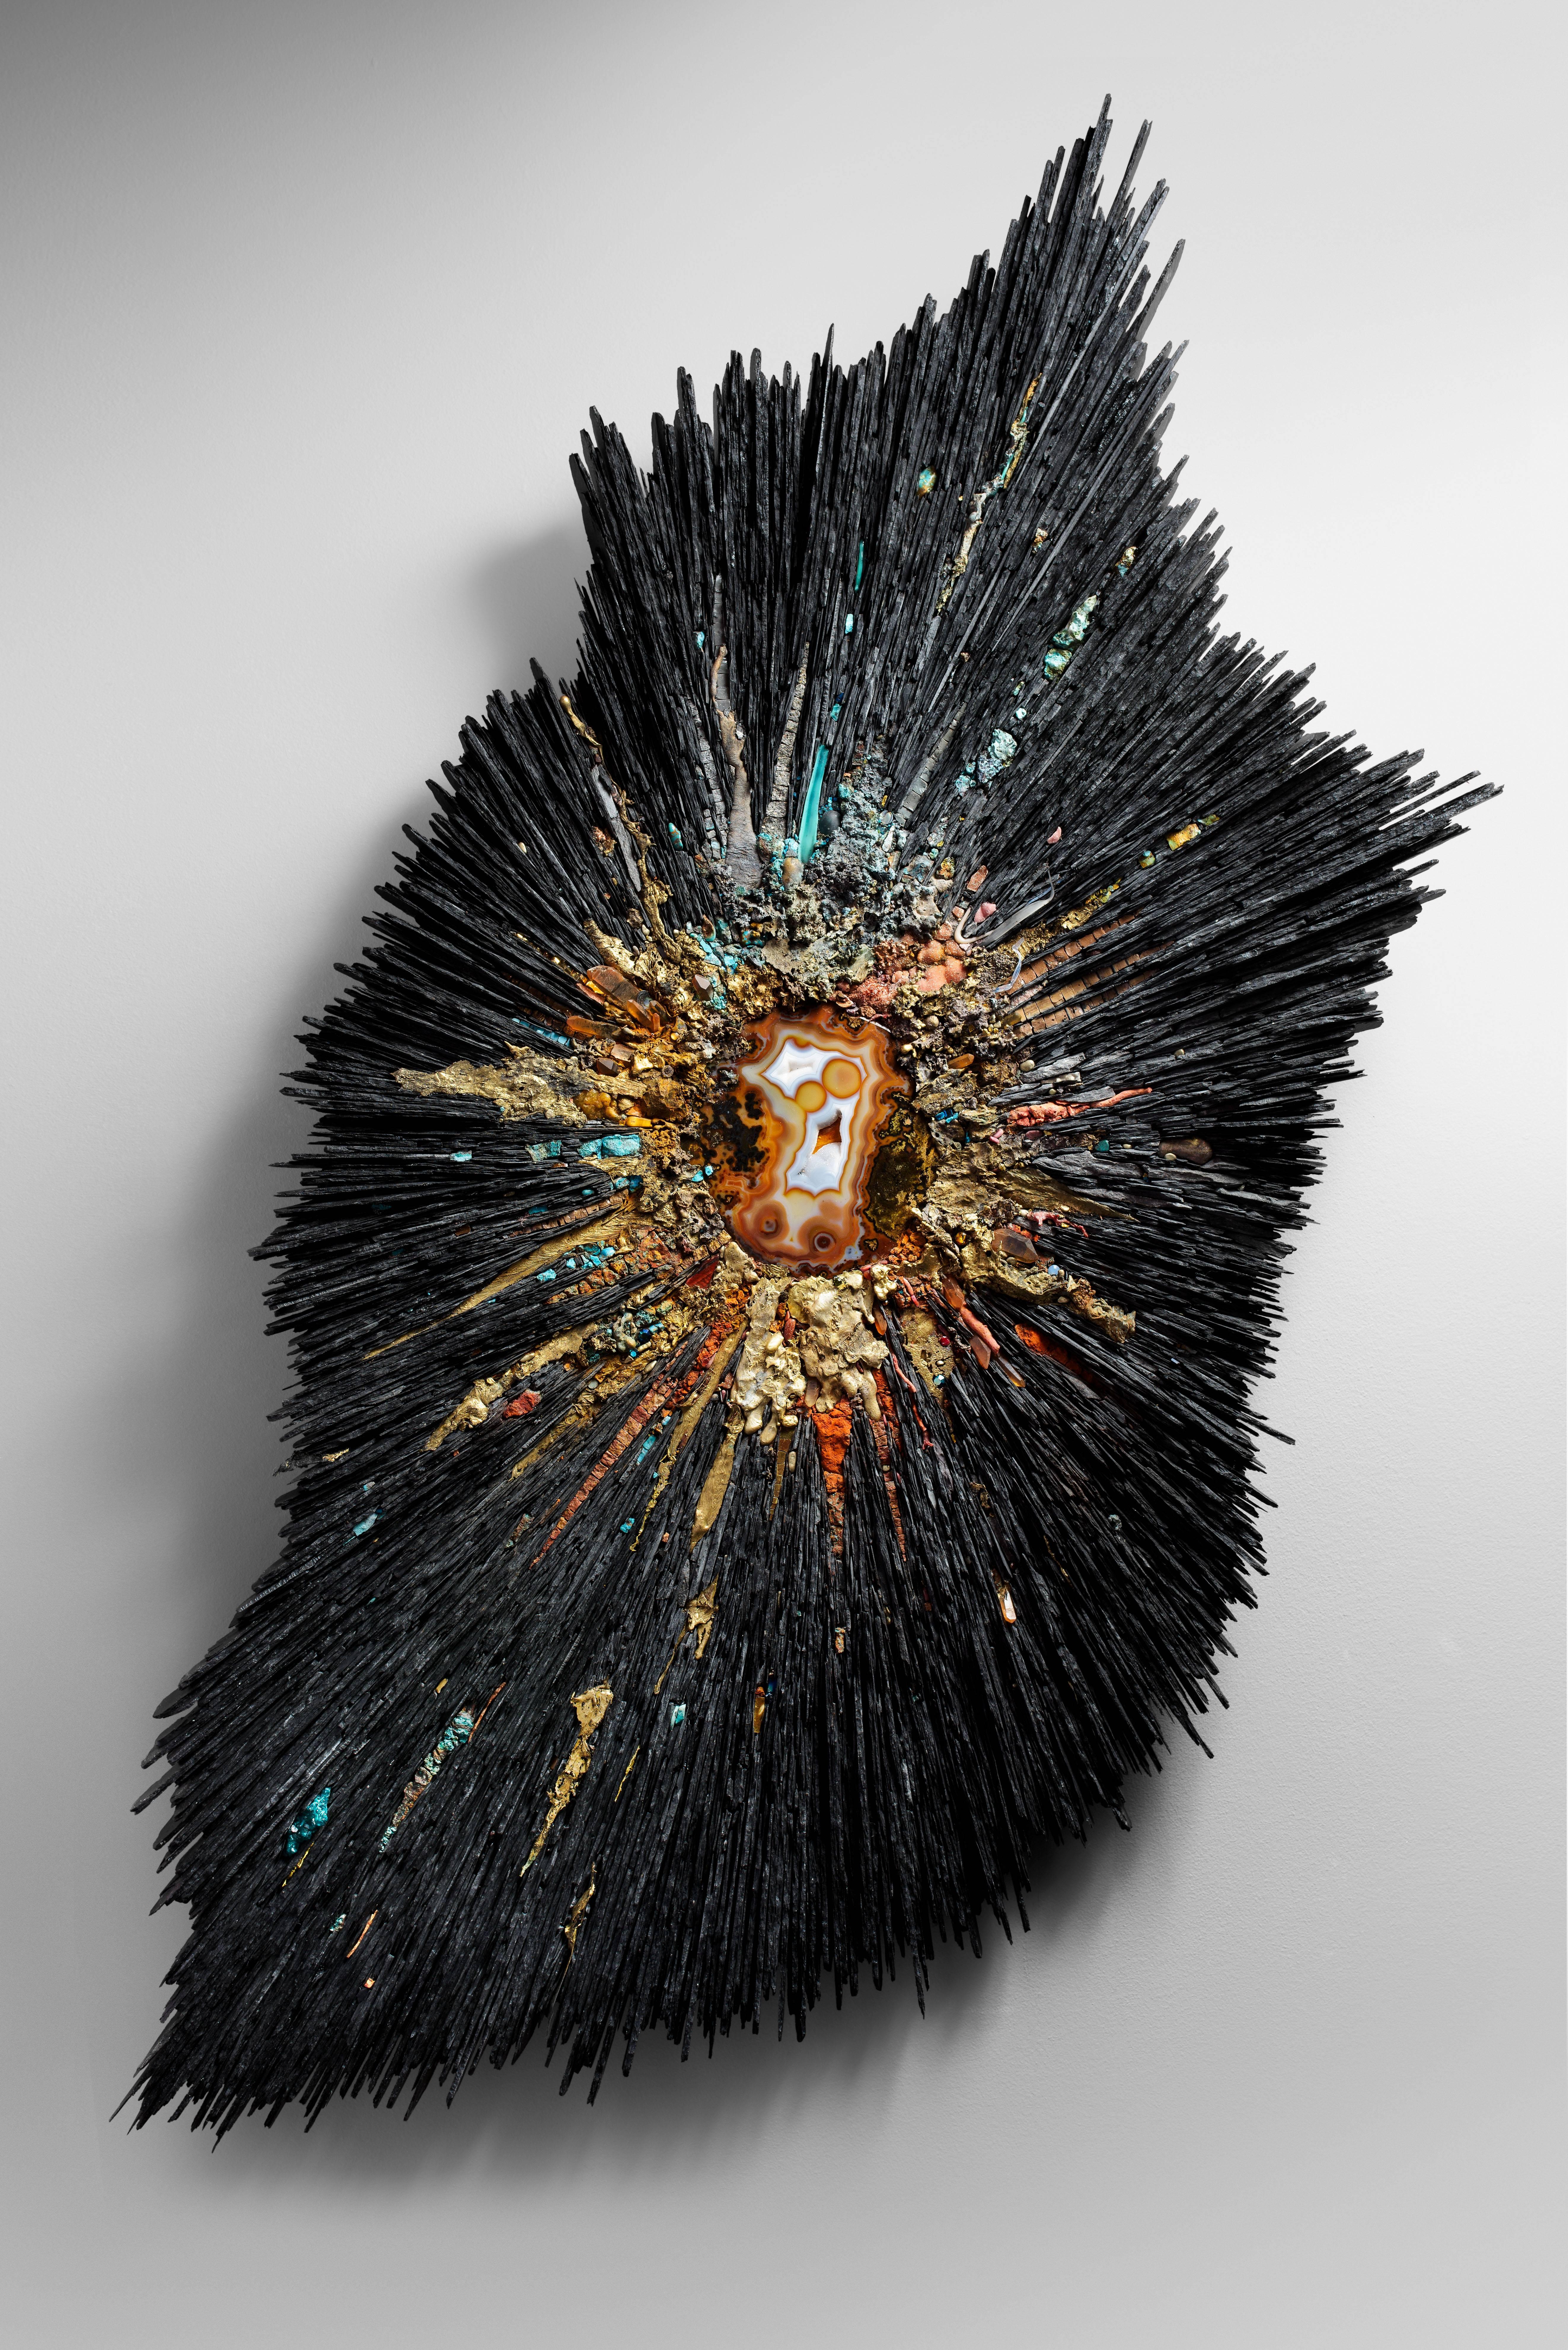 Béatrice Serre 2015, wall sculptur, Big Bang 7, black and grey slate, Murano glass, golden enamels, bronze, brass, copper, agate, rosacite, chrysocole, turquoise, marble, quartz, amber
Measures: 120 cm height, 60 cm width, 7 cm depth.
Dated and